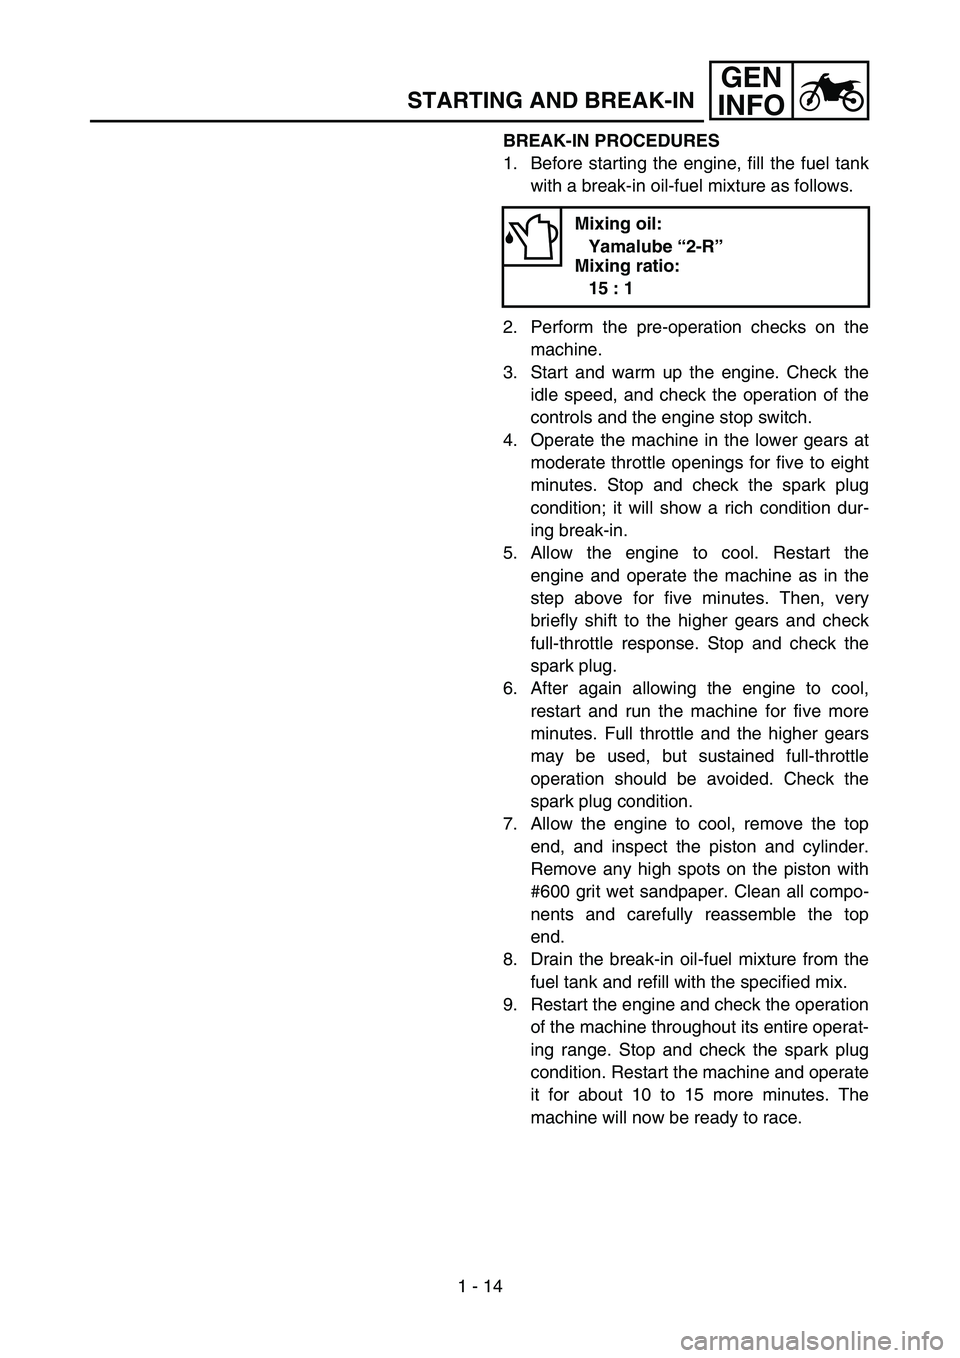 YAMAHA YZ85 2004  Owners Manual 1 - 14
GEN
INFO
STARTING AND BREAK-IN
BREAK-IN PROCEDURES
1. Before starting the engine, fill the fuel tank
with a break-in oil-fuel mixture as follows.
2. Perform the pre-operation checks on the
mach